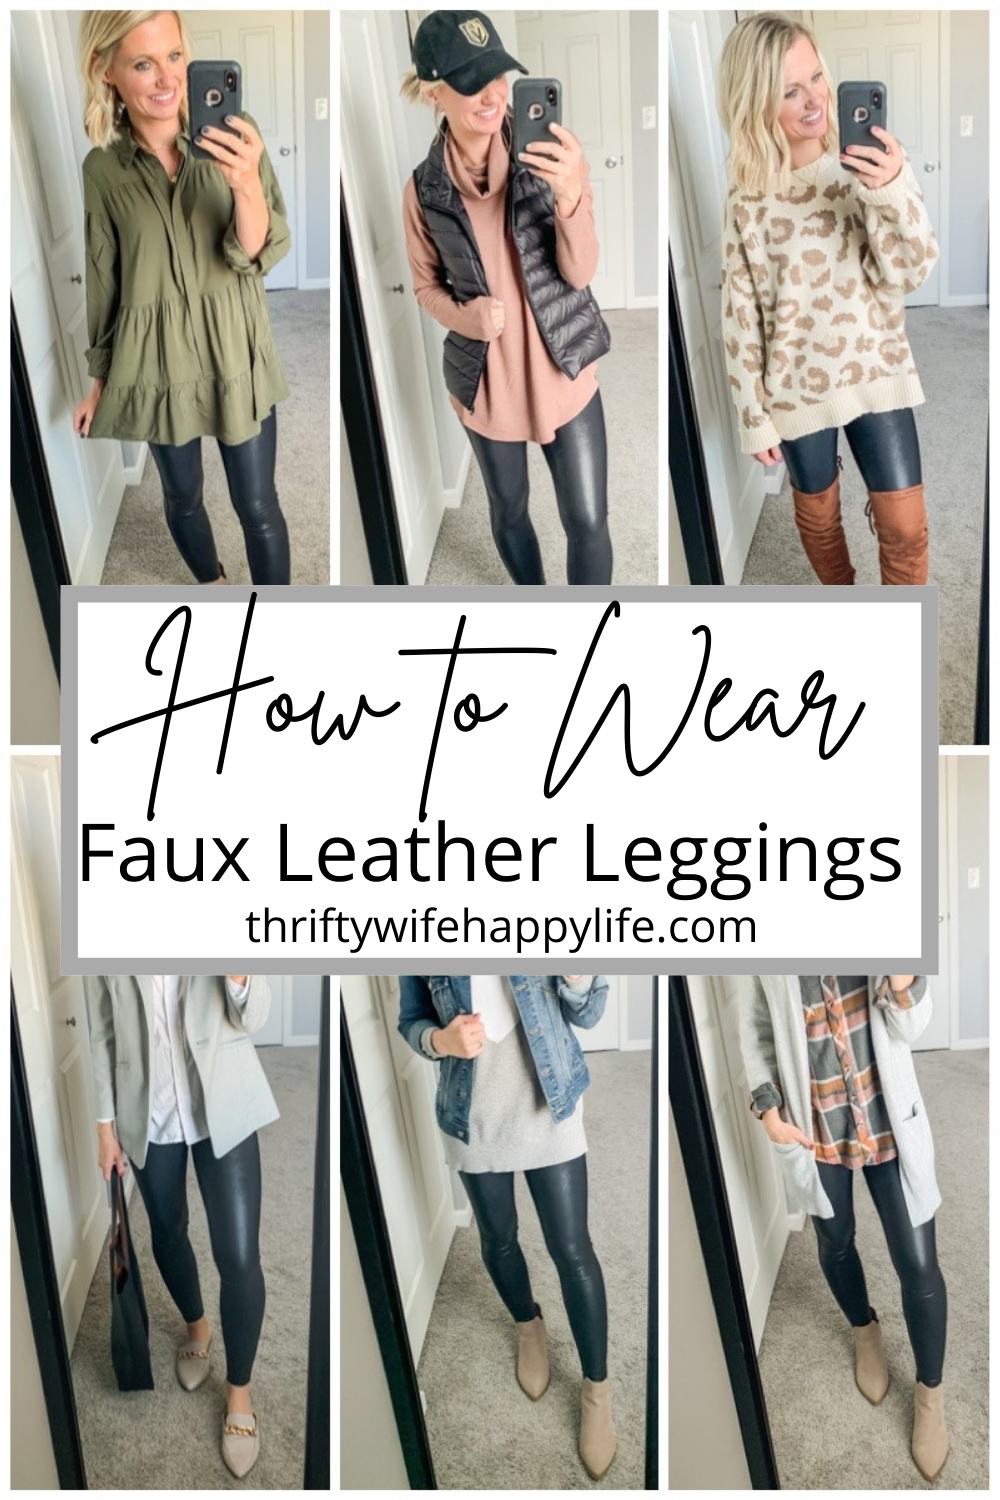 How to Wear Faux Leather Leggings in 2021  Outfits with leggings, Faux leather  outfits, Leggins outfit